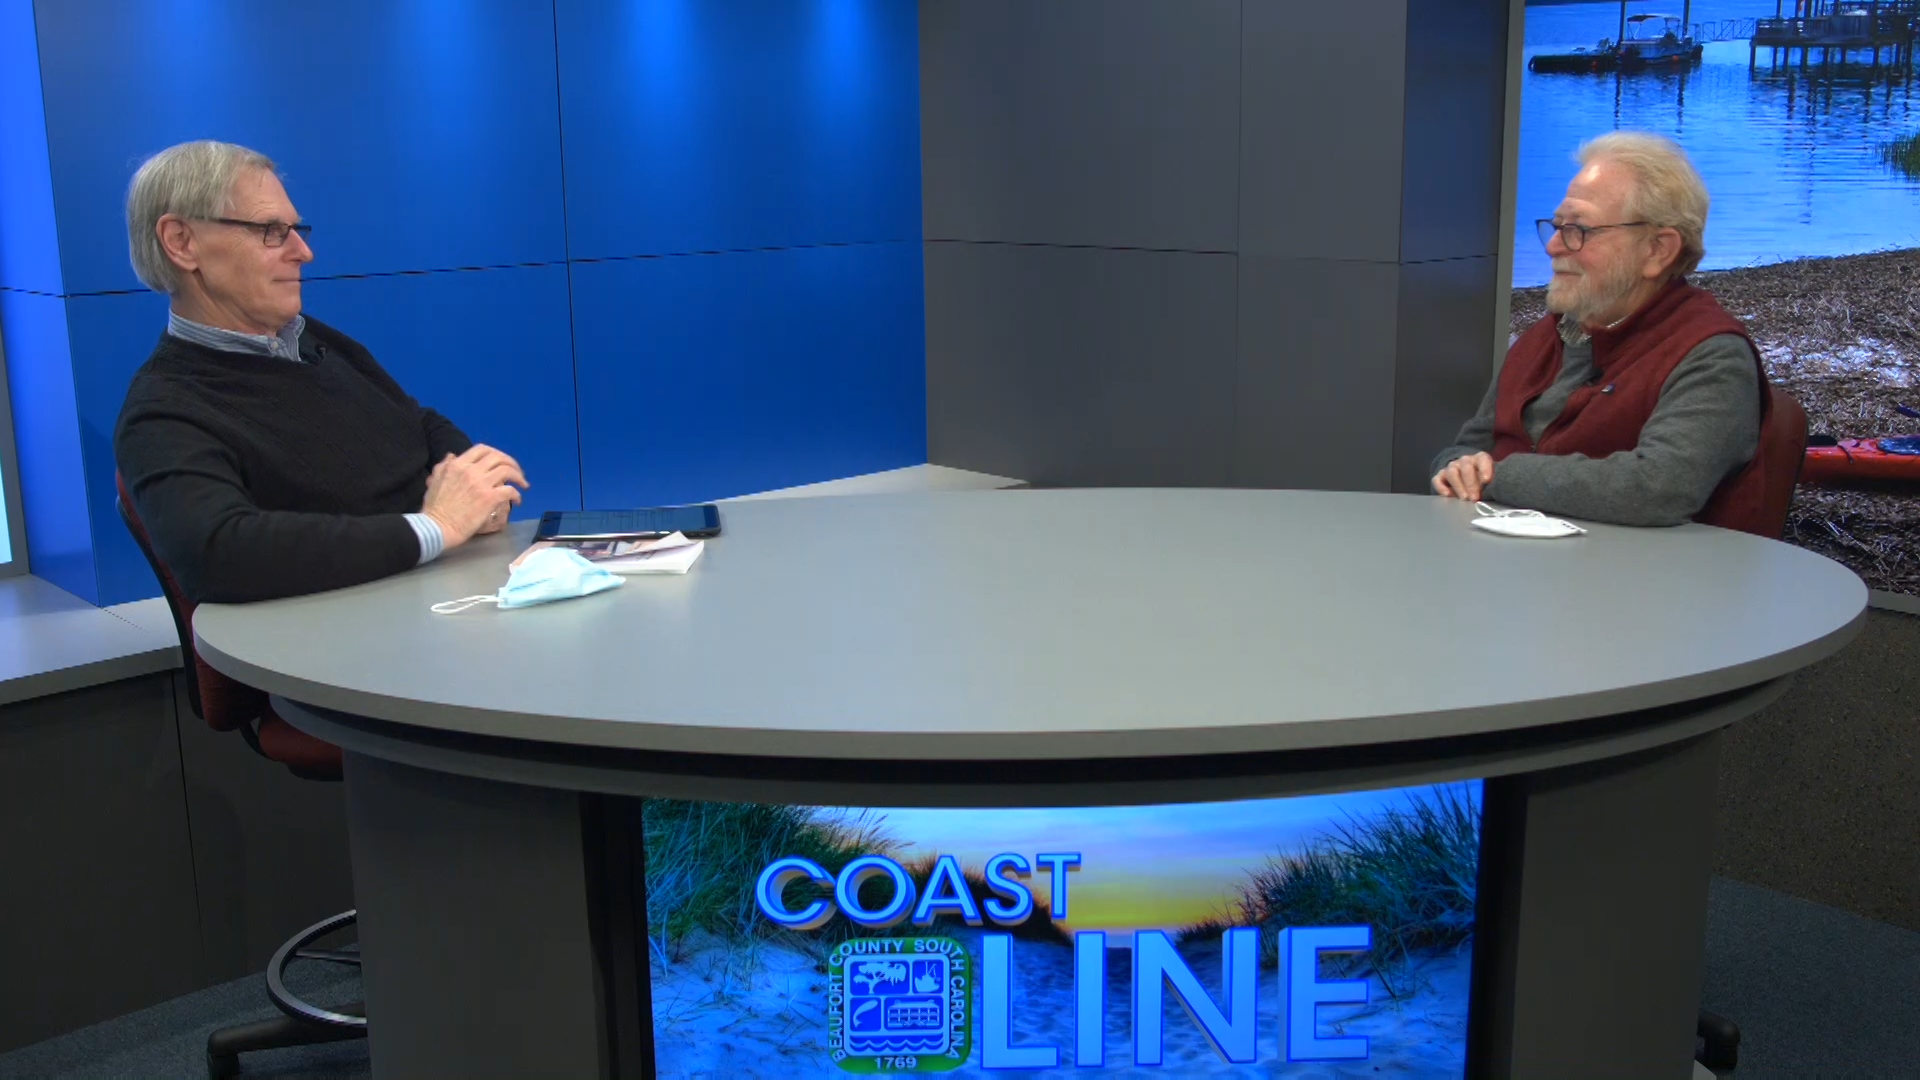 New Episode of The County Channel Show, Coastline